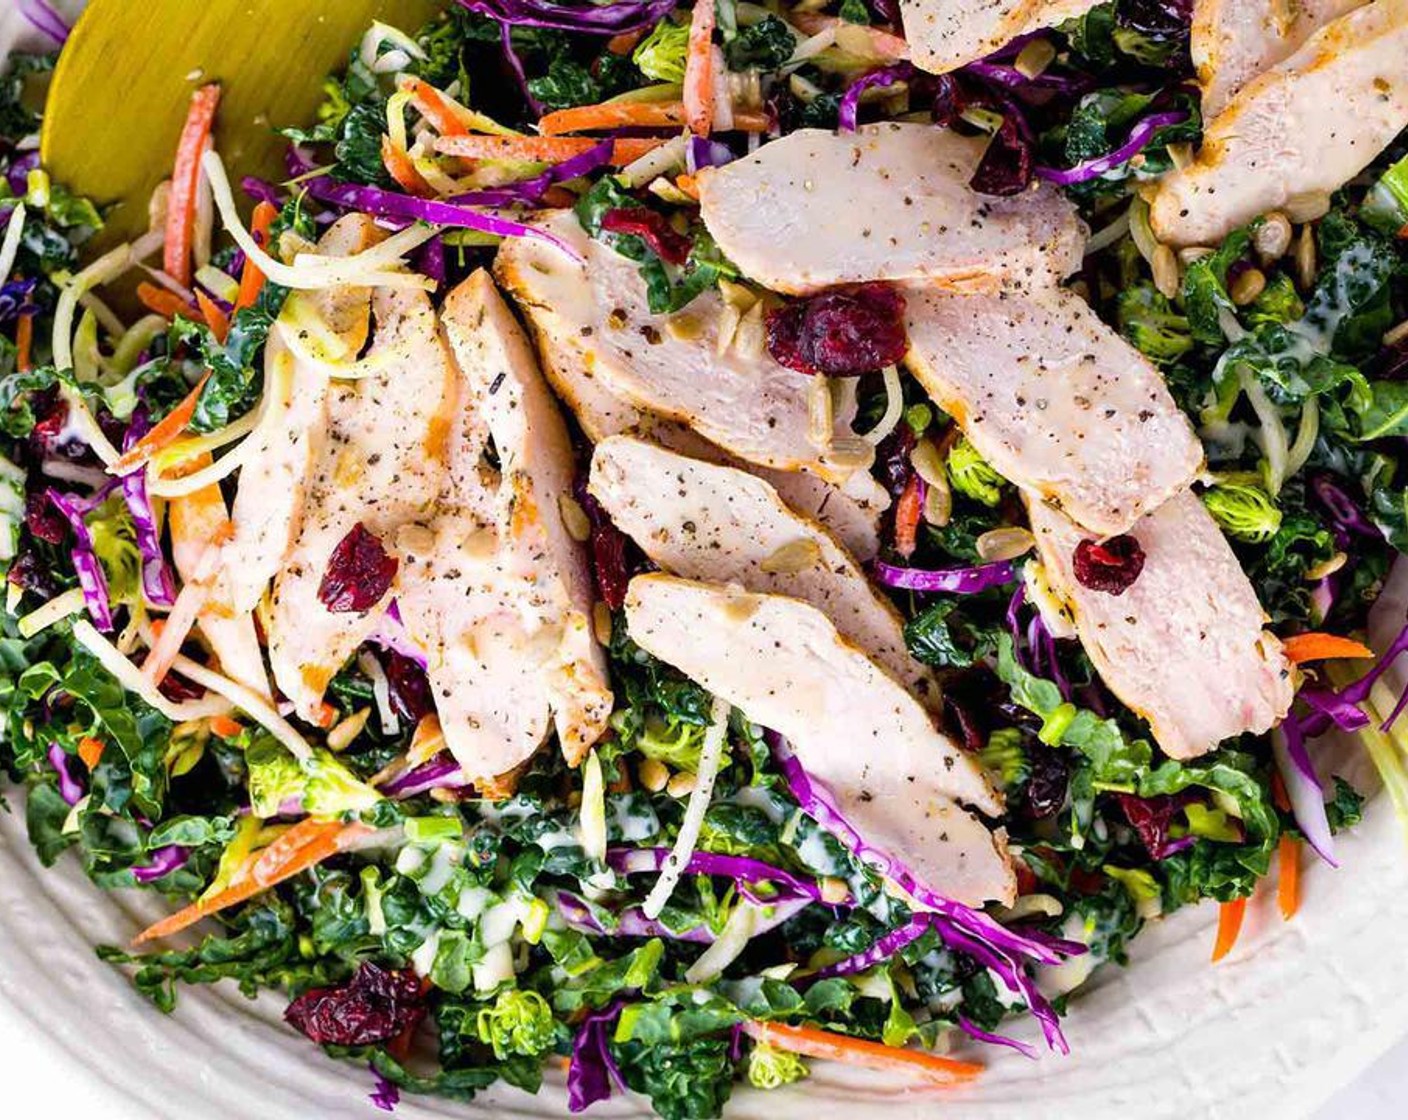 Kale and Broccoli Slaw Salad with Chicken